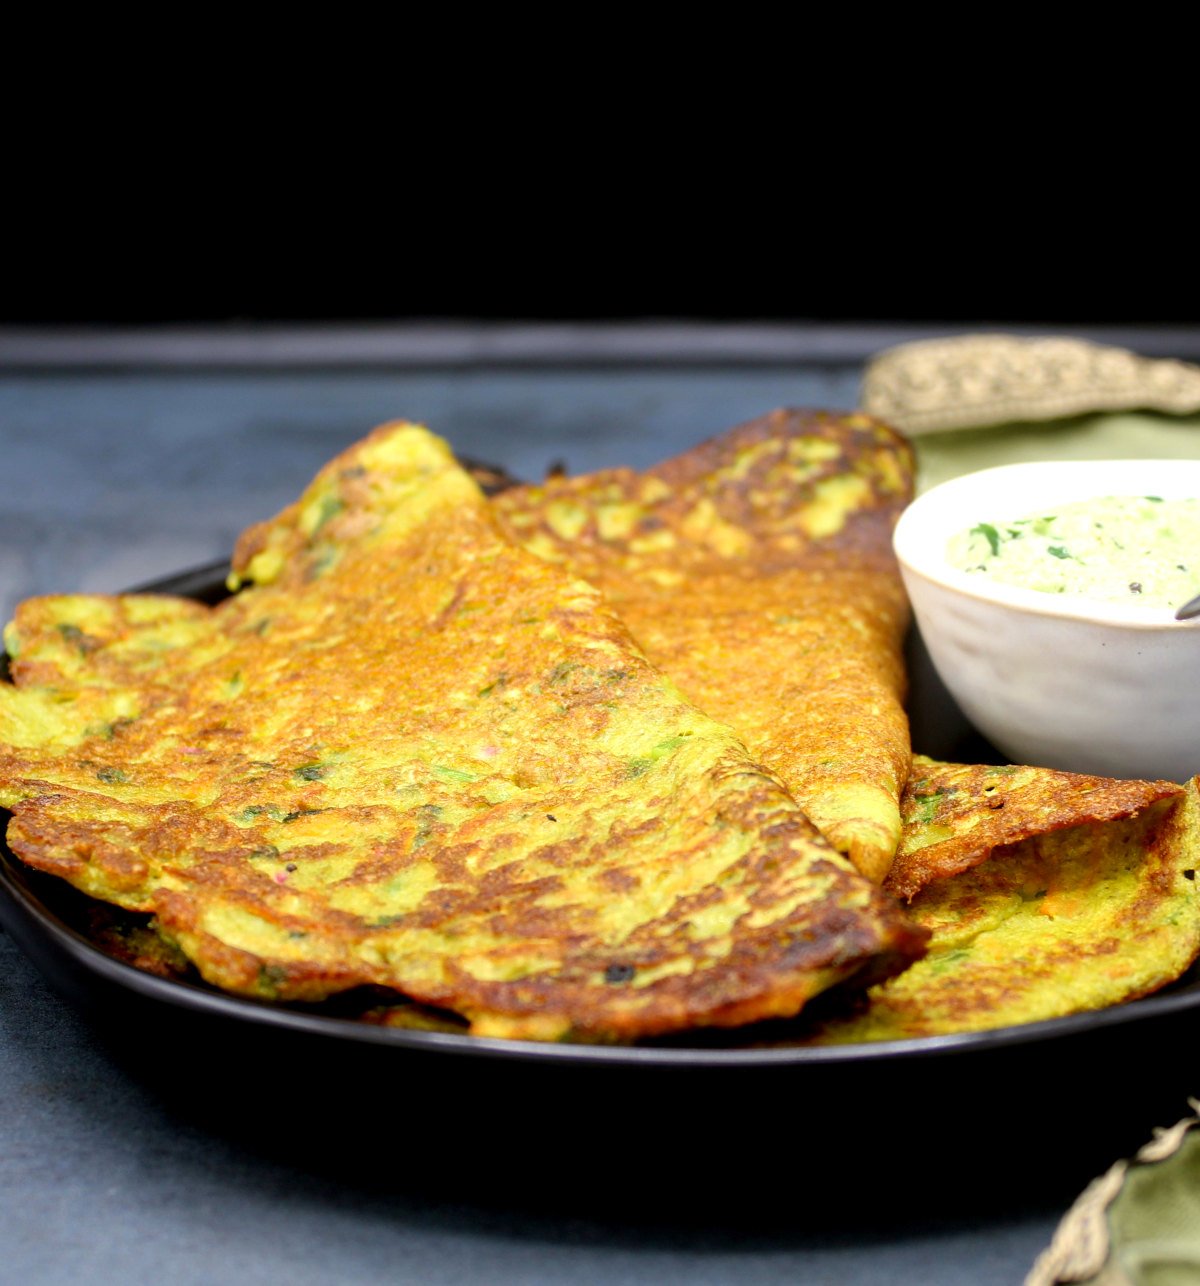 Front partial shot of golden brown moong cheelas in a black plate with chutney.